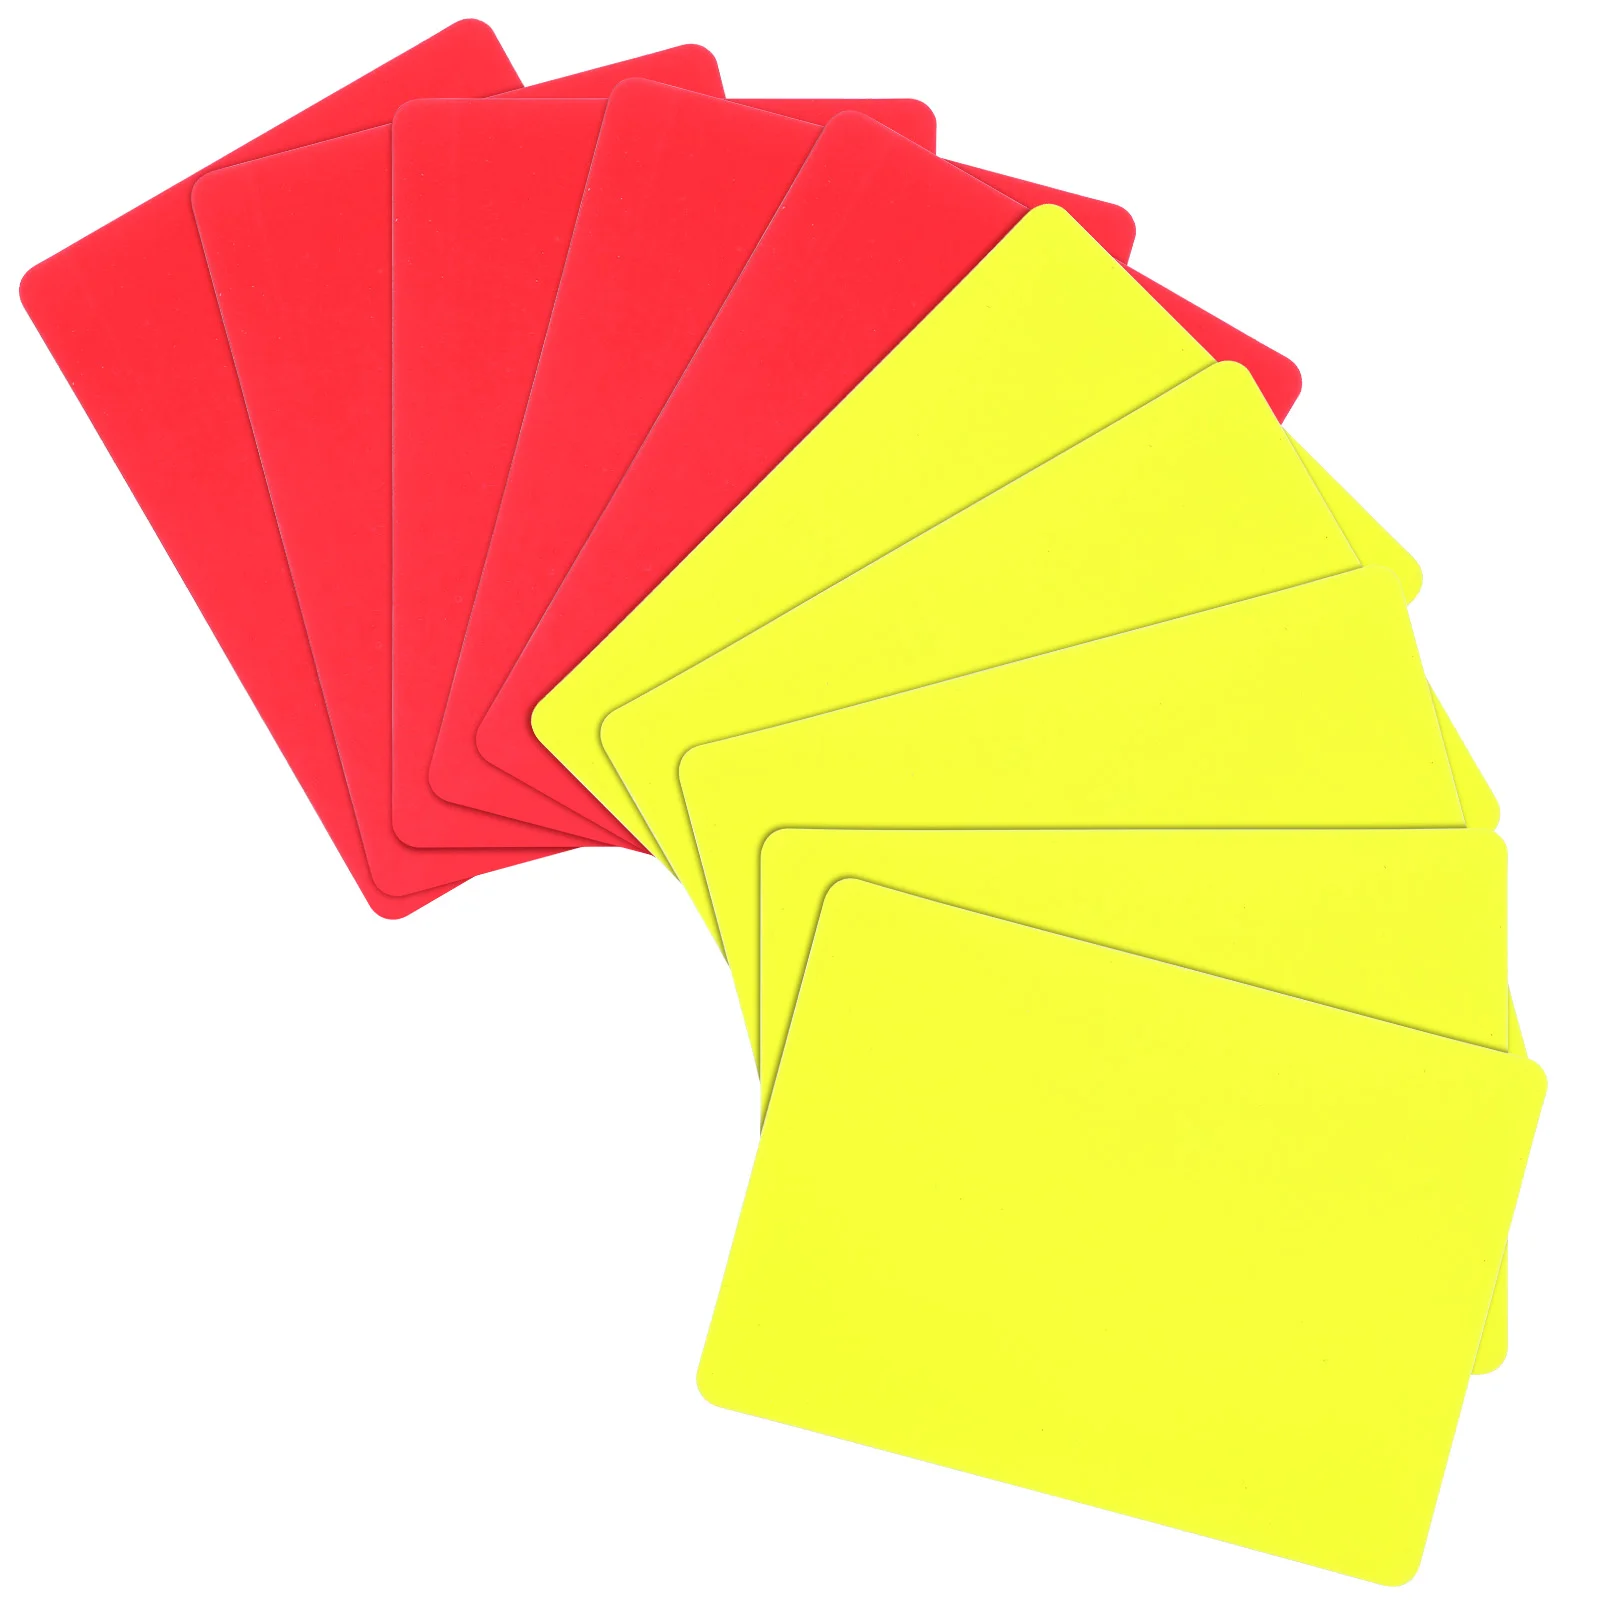 Referee Cards Set Football Soccer Standard Cards Red Yellow Judge Cards Outdoor Football Match Training Referee Equipment